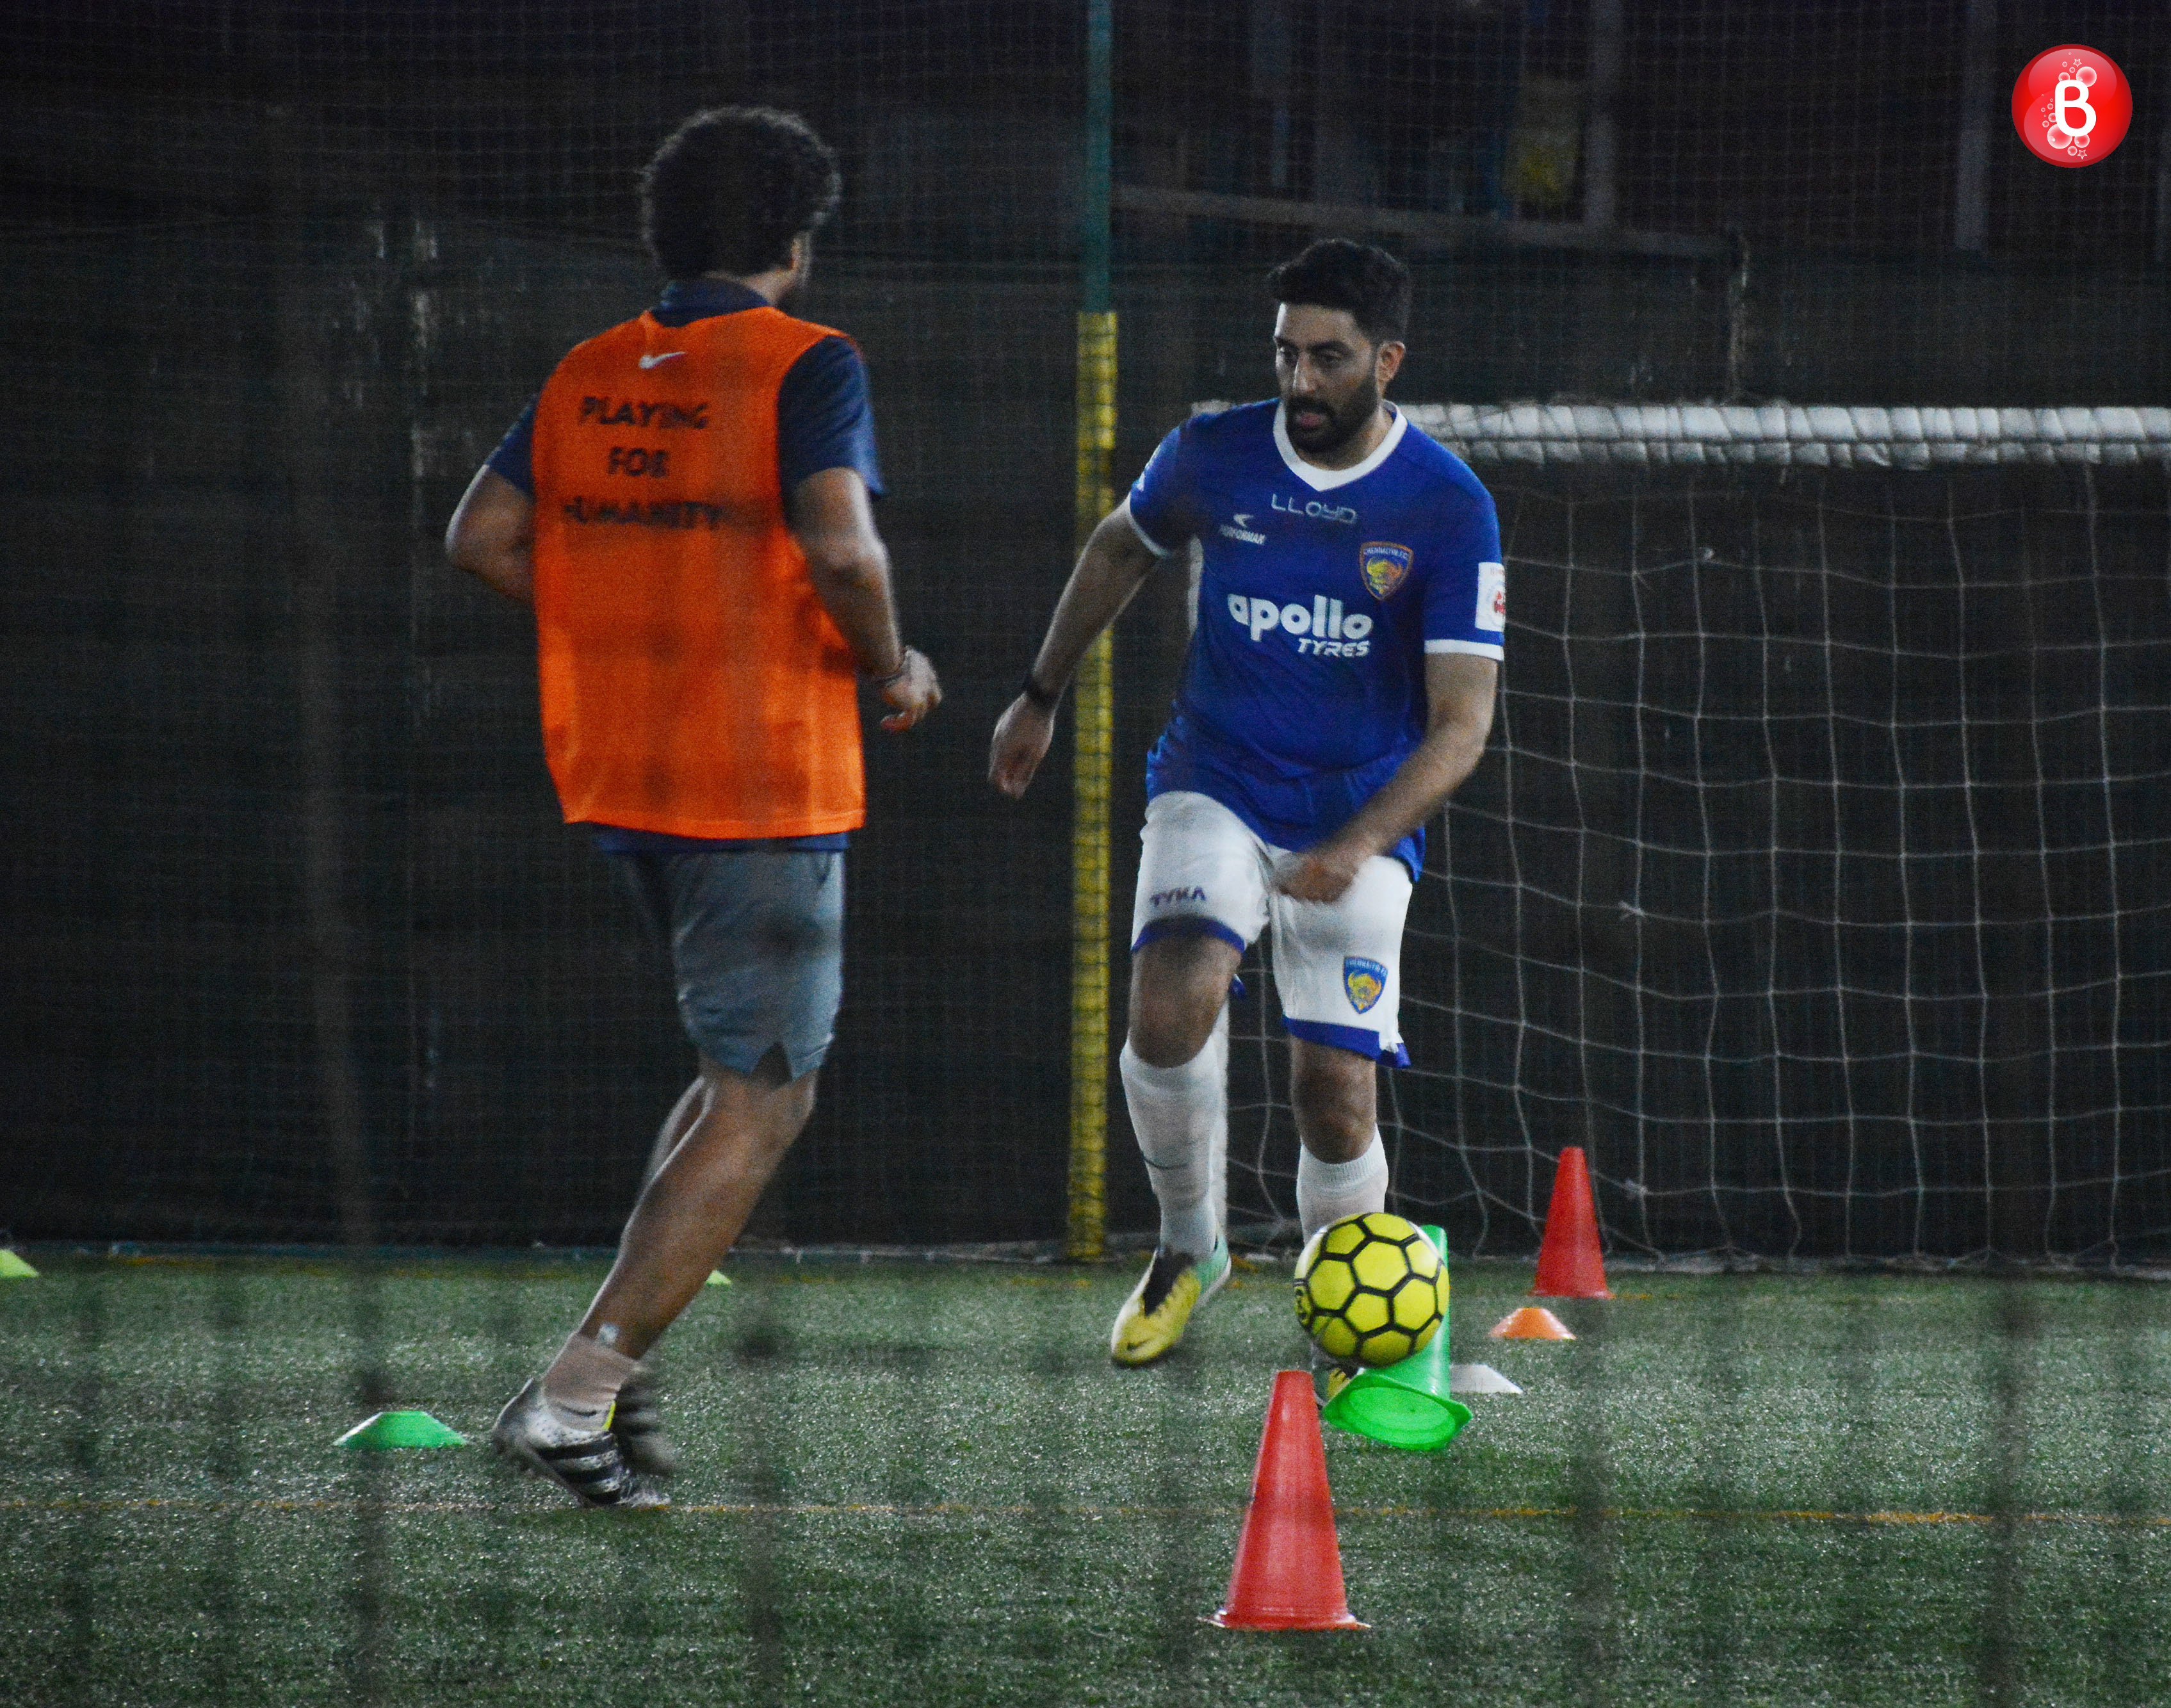 Abhishek Bachchan’s pictures playing football